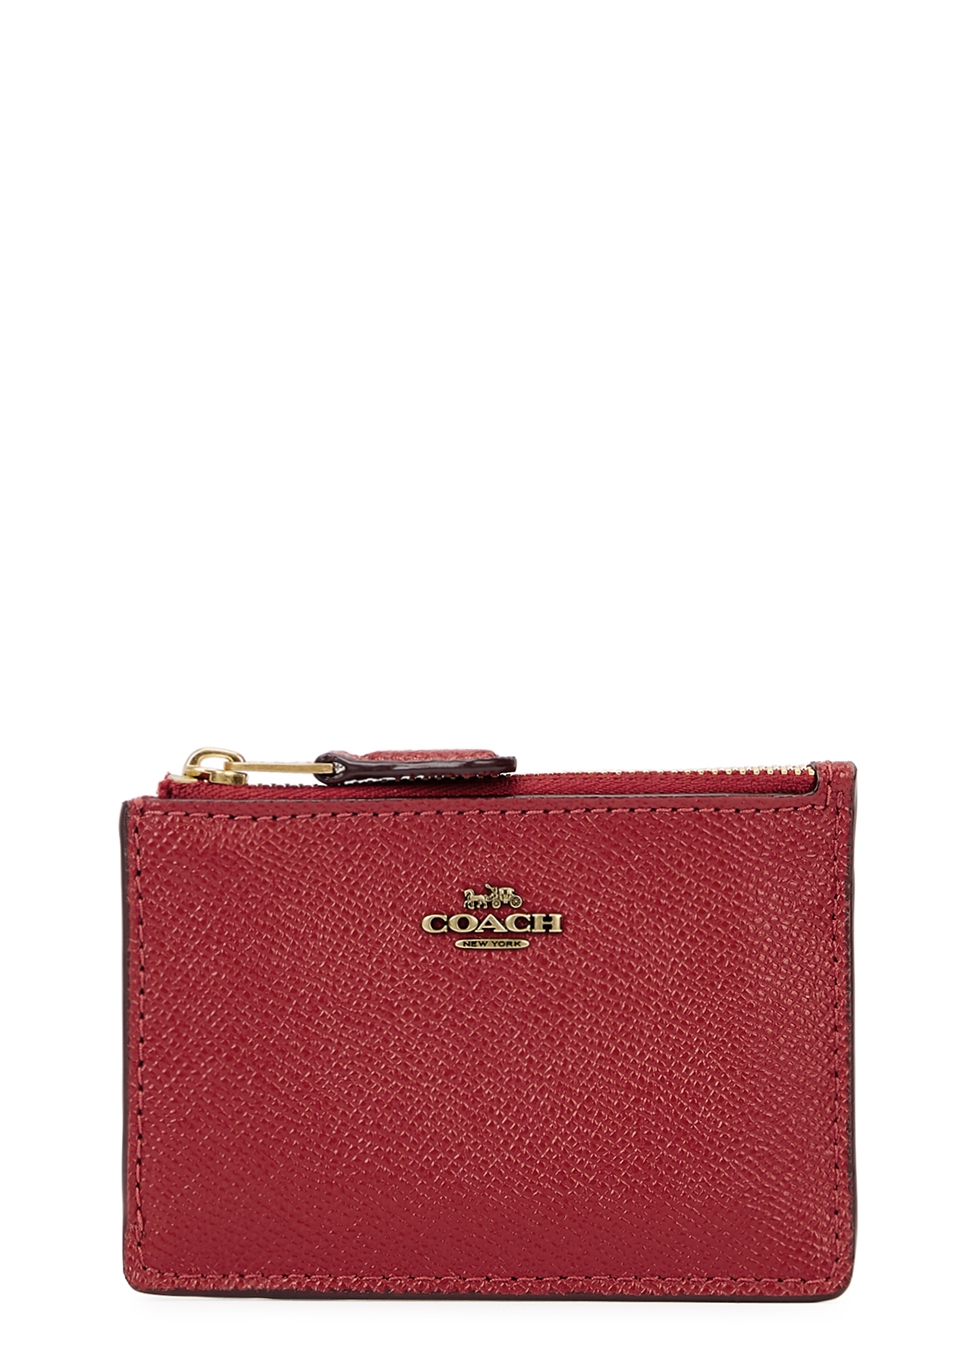 Coach Red leather coin purse - Harvey Nichols